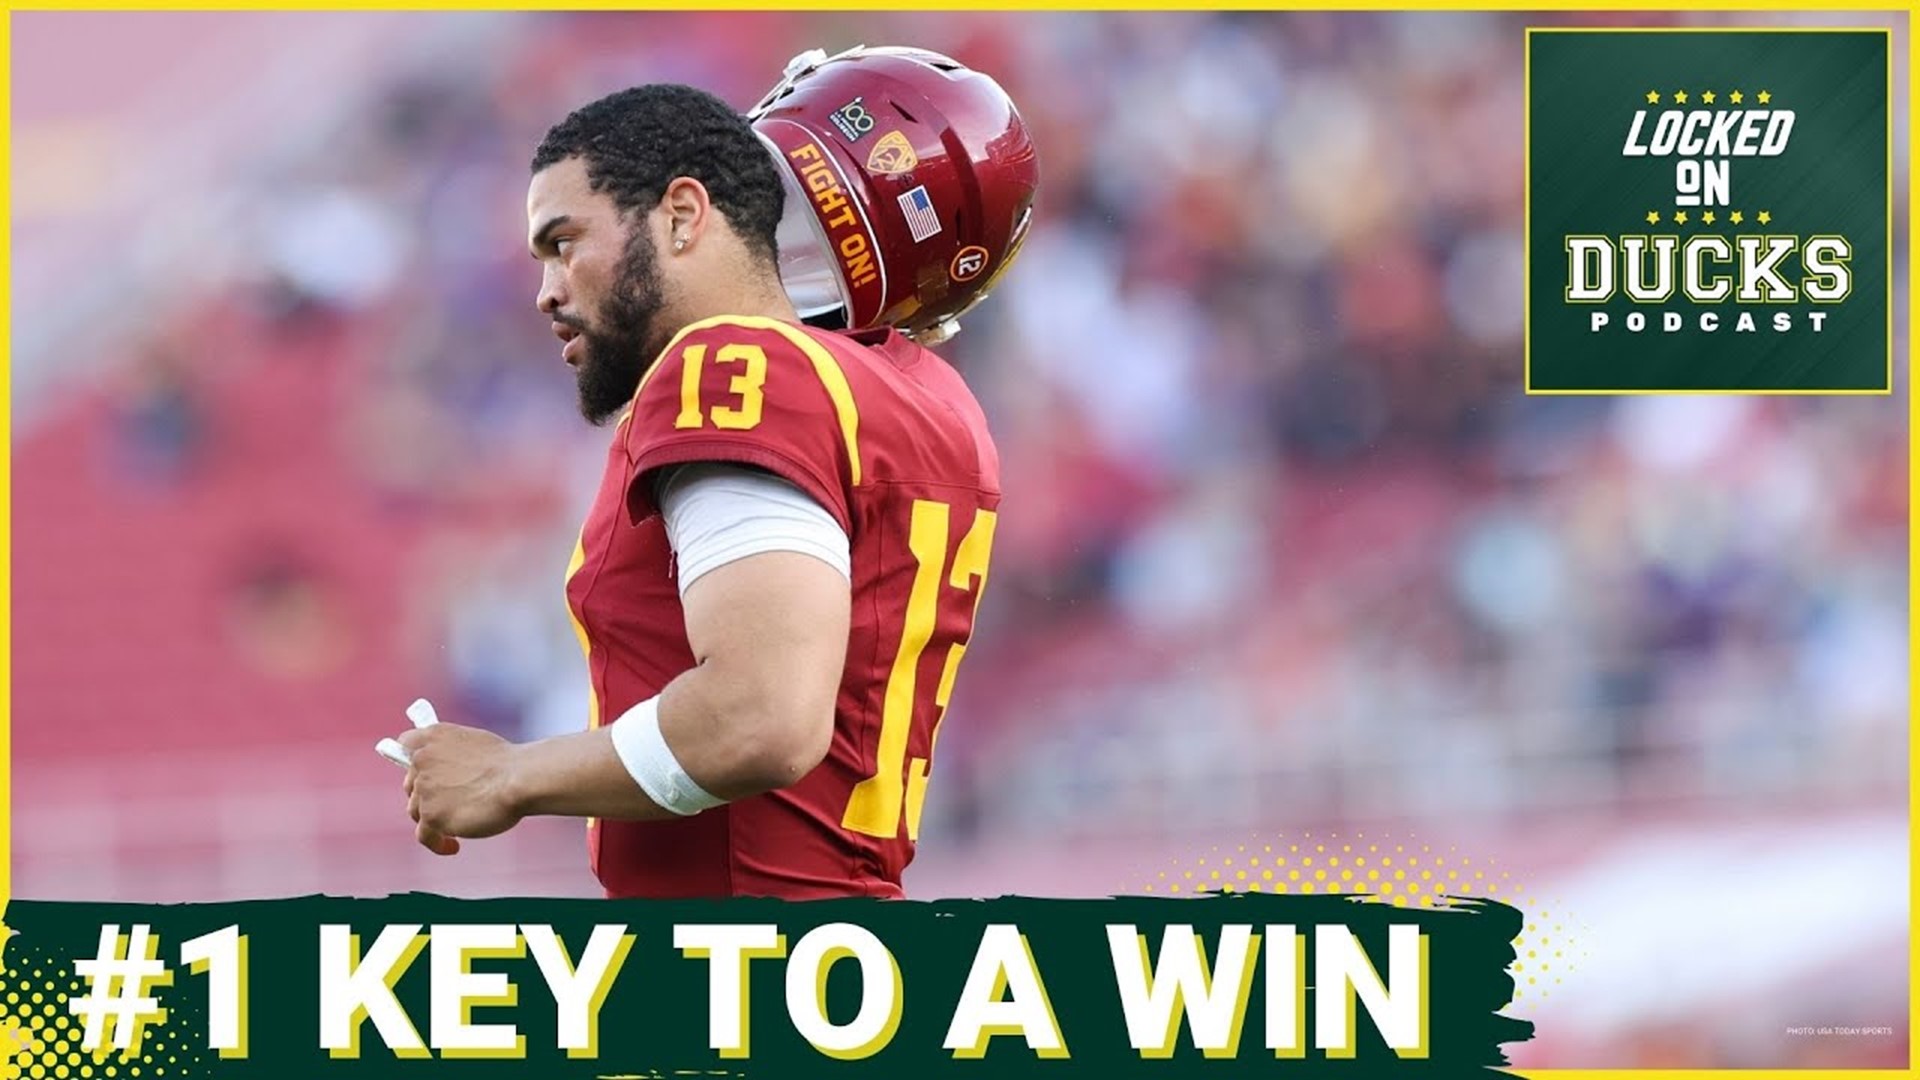 USC comes into Autzen Stadium this Saturday on a serious slide having dropped 3 of their last 4 games, with their only win coming against a Cal team